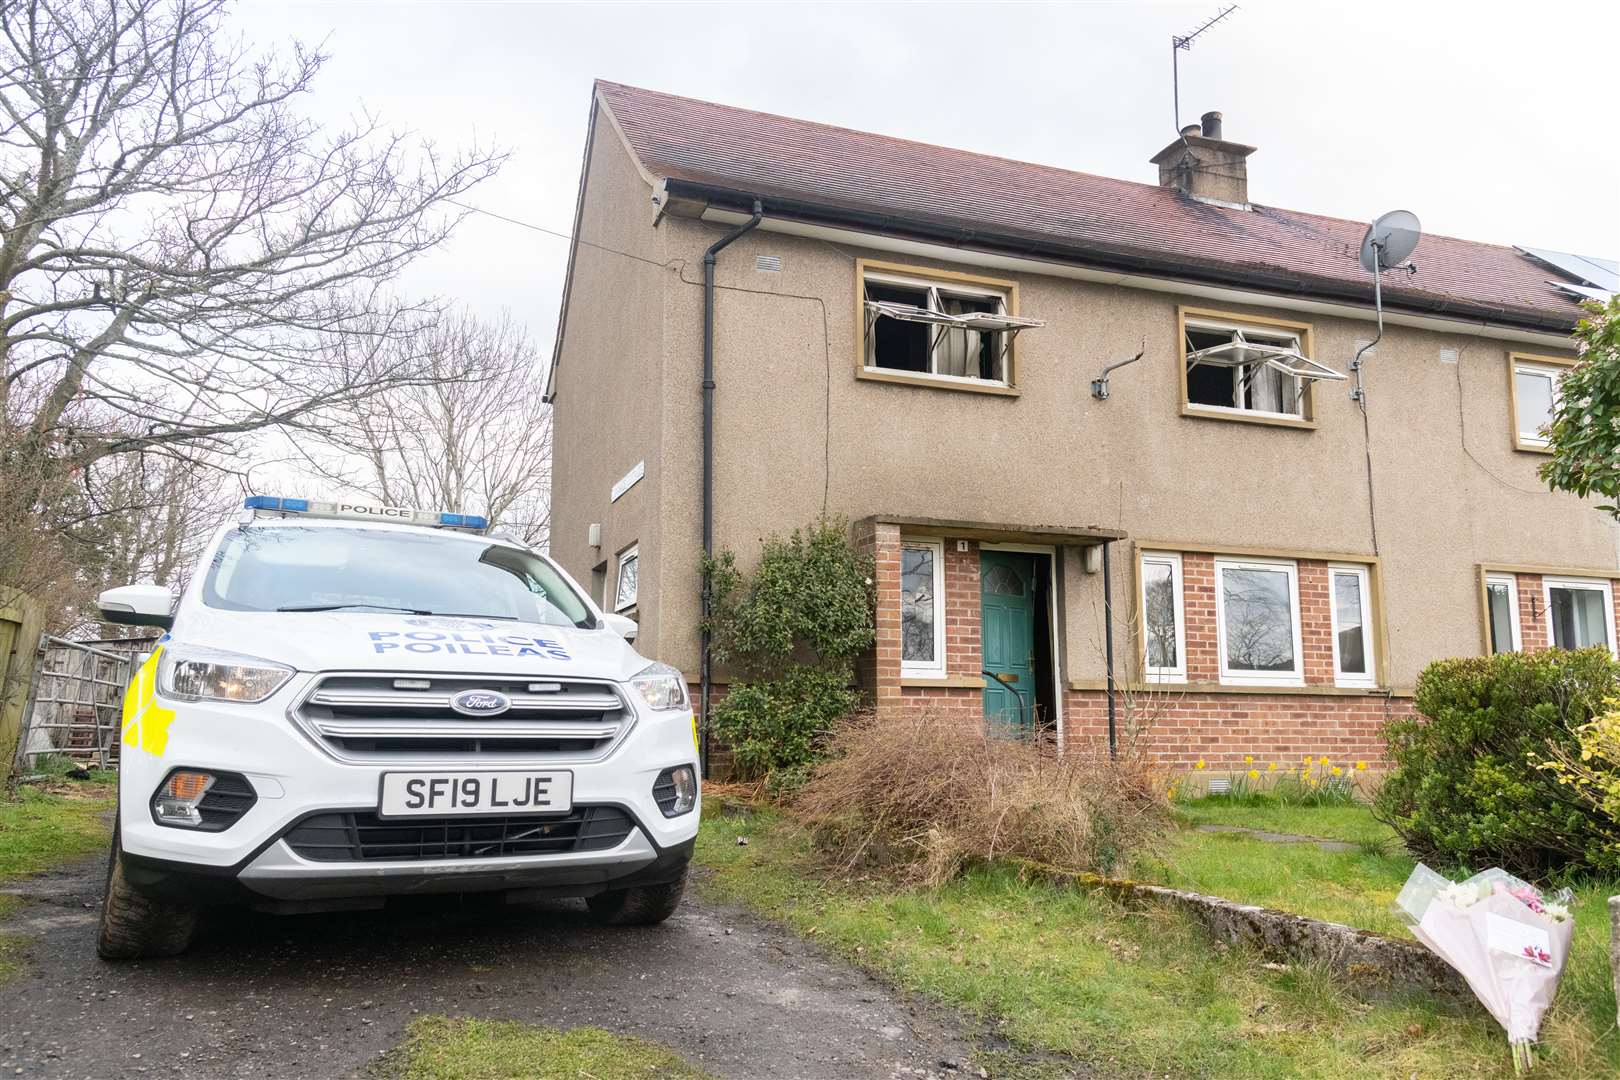 Police undertake investigations into the cause of a fire at Connages Cottage which claimed the life of a 74-year-old man. Picture: Beth Taylor